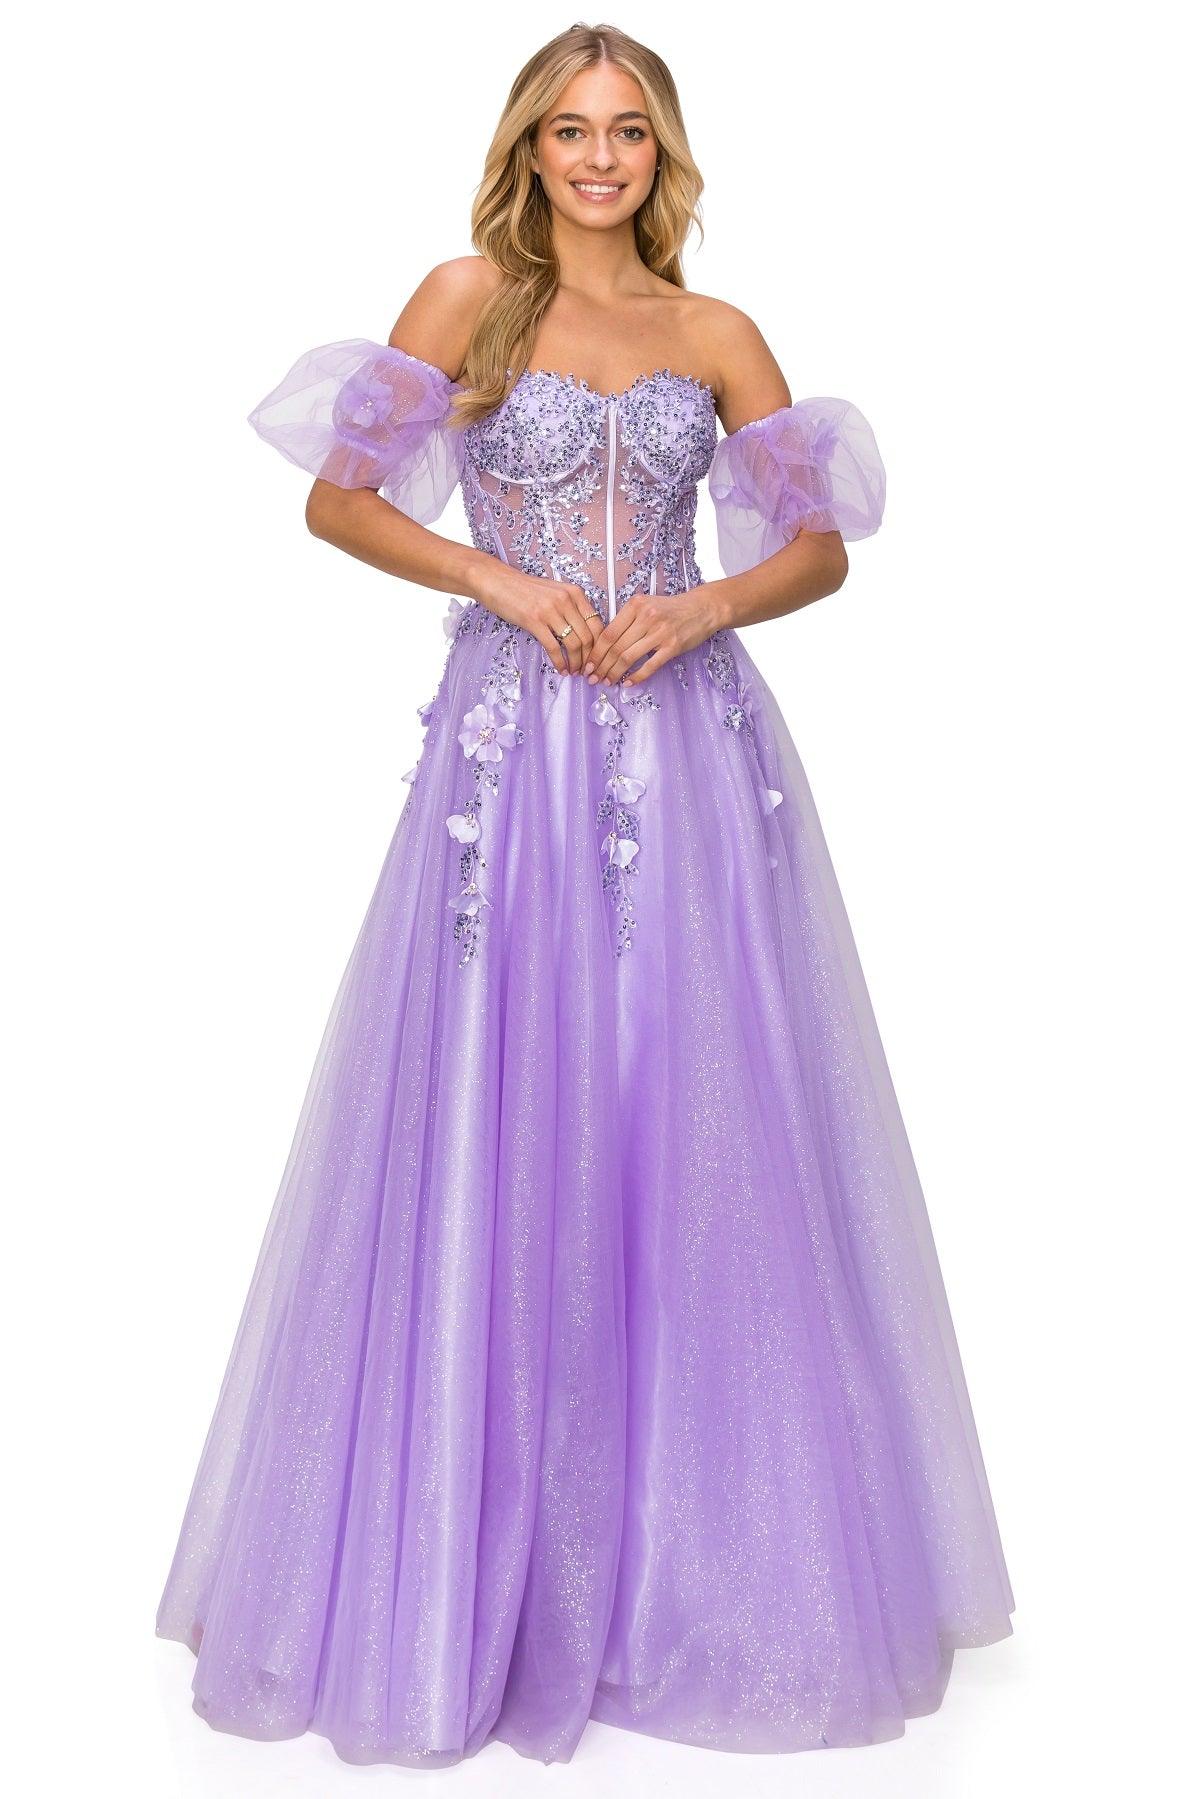 Cinderella Couture CC8042J Strapless A Line Glittered Tulle Gown Lilac